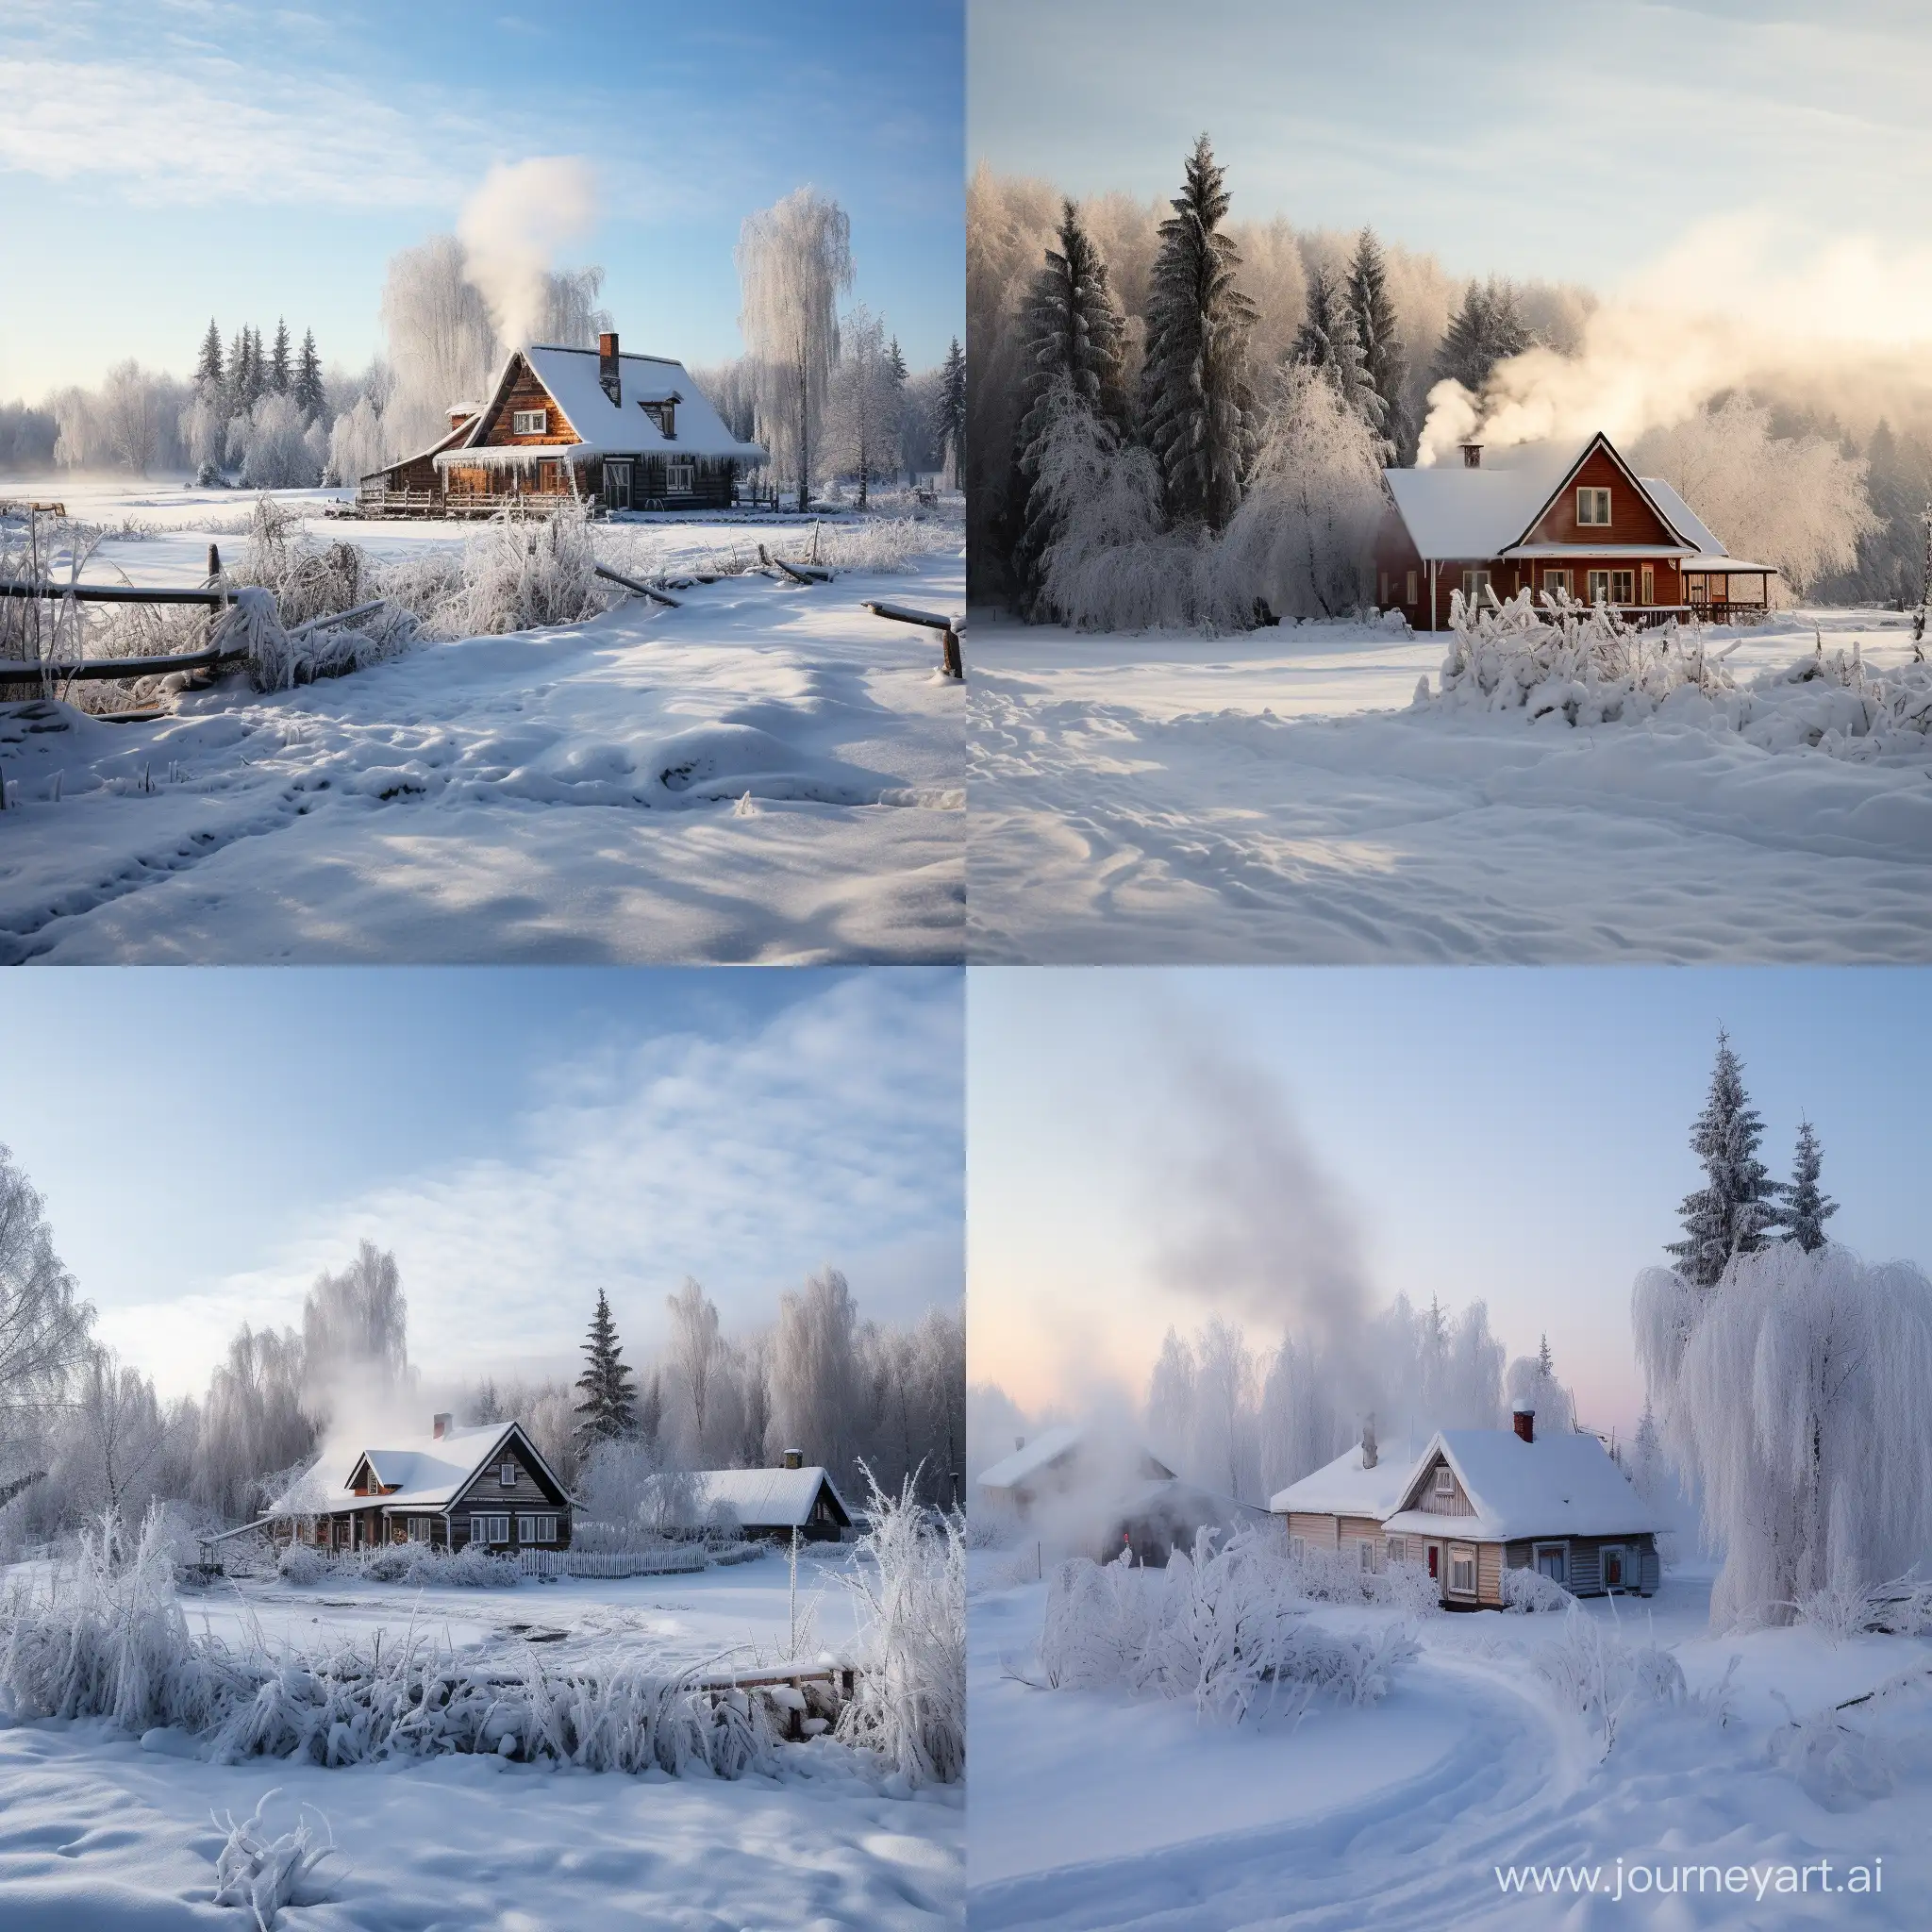 Cozy-Winter-Village-Scene-with-SnowCovered-House-and-Forest